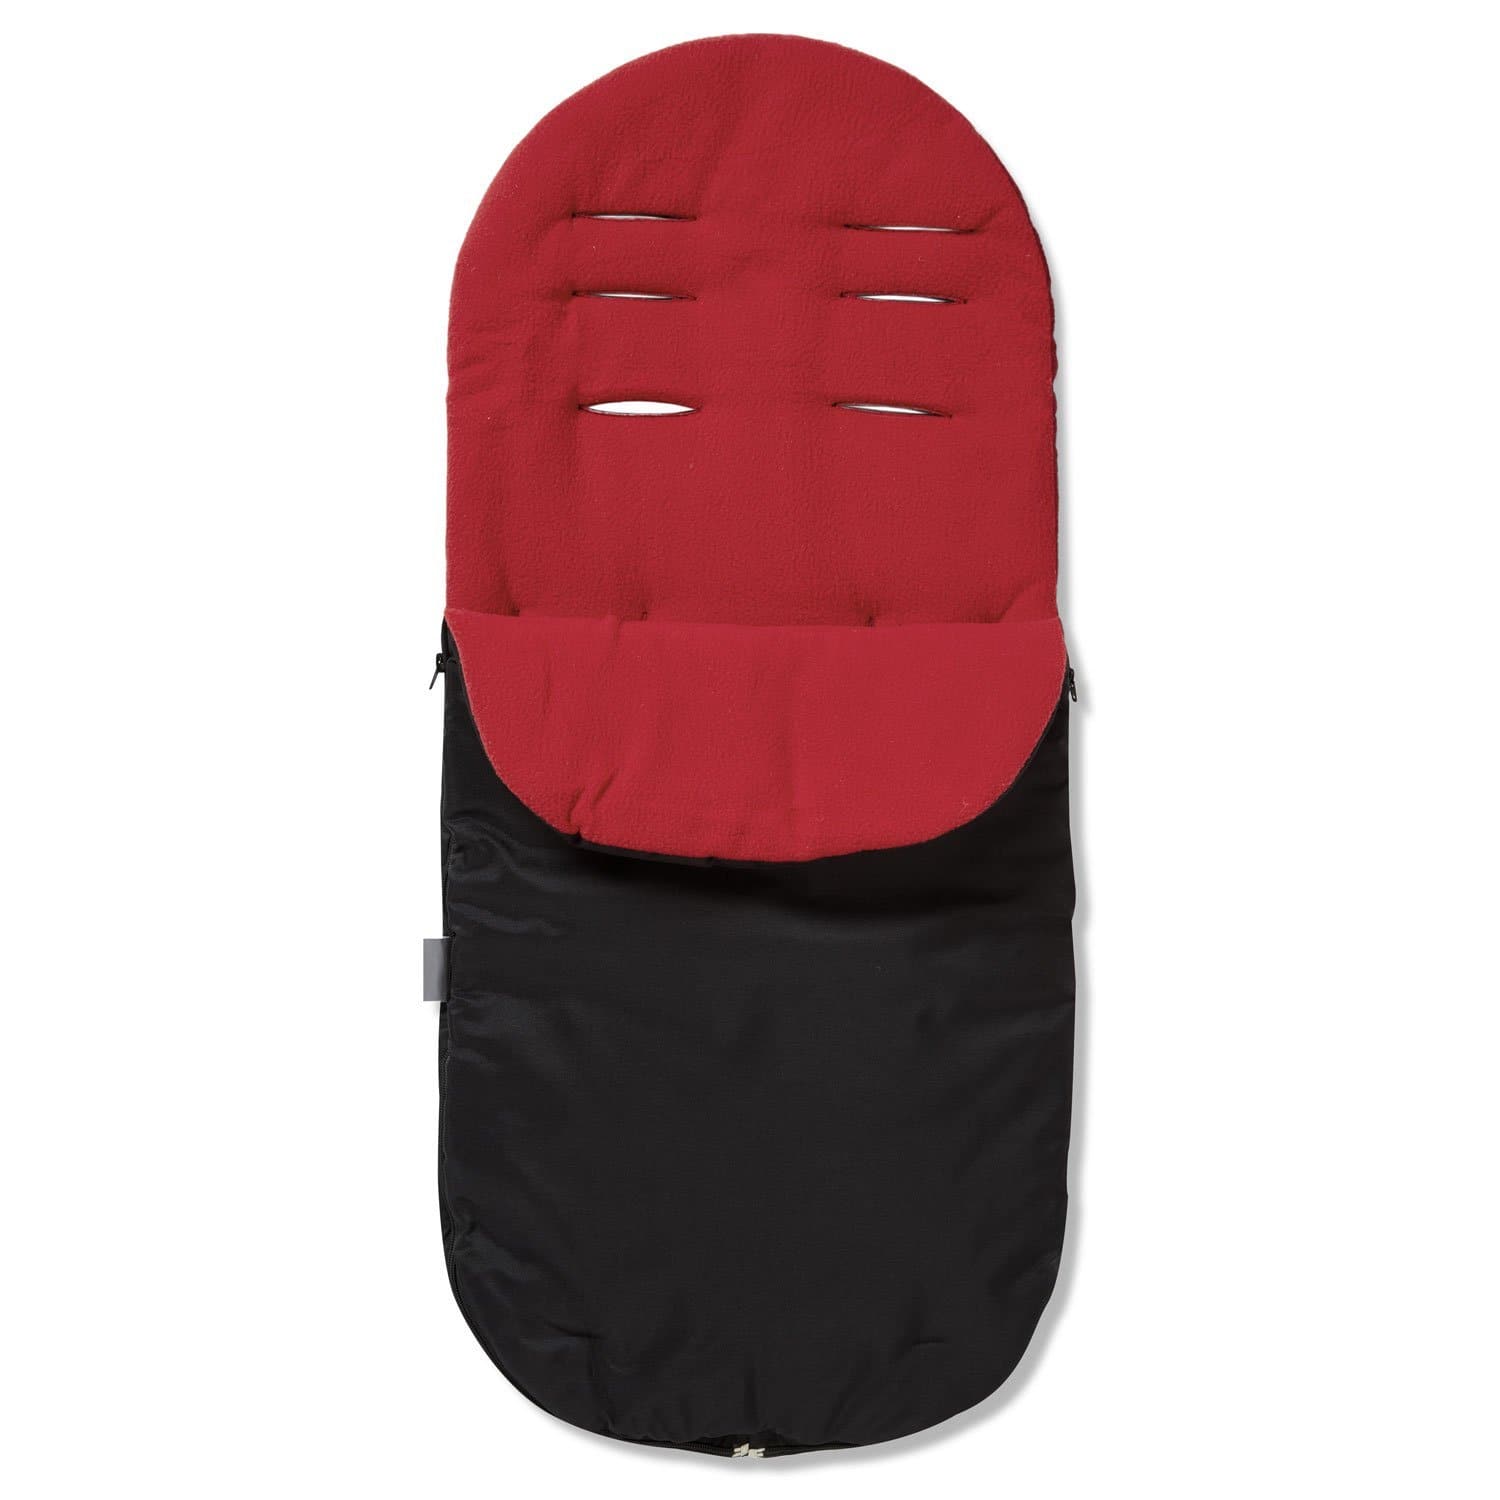 Footmuff / Cosy Toes Compatible with Silver Cross - Red / Fits All Models | For Your Little One